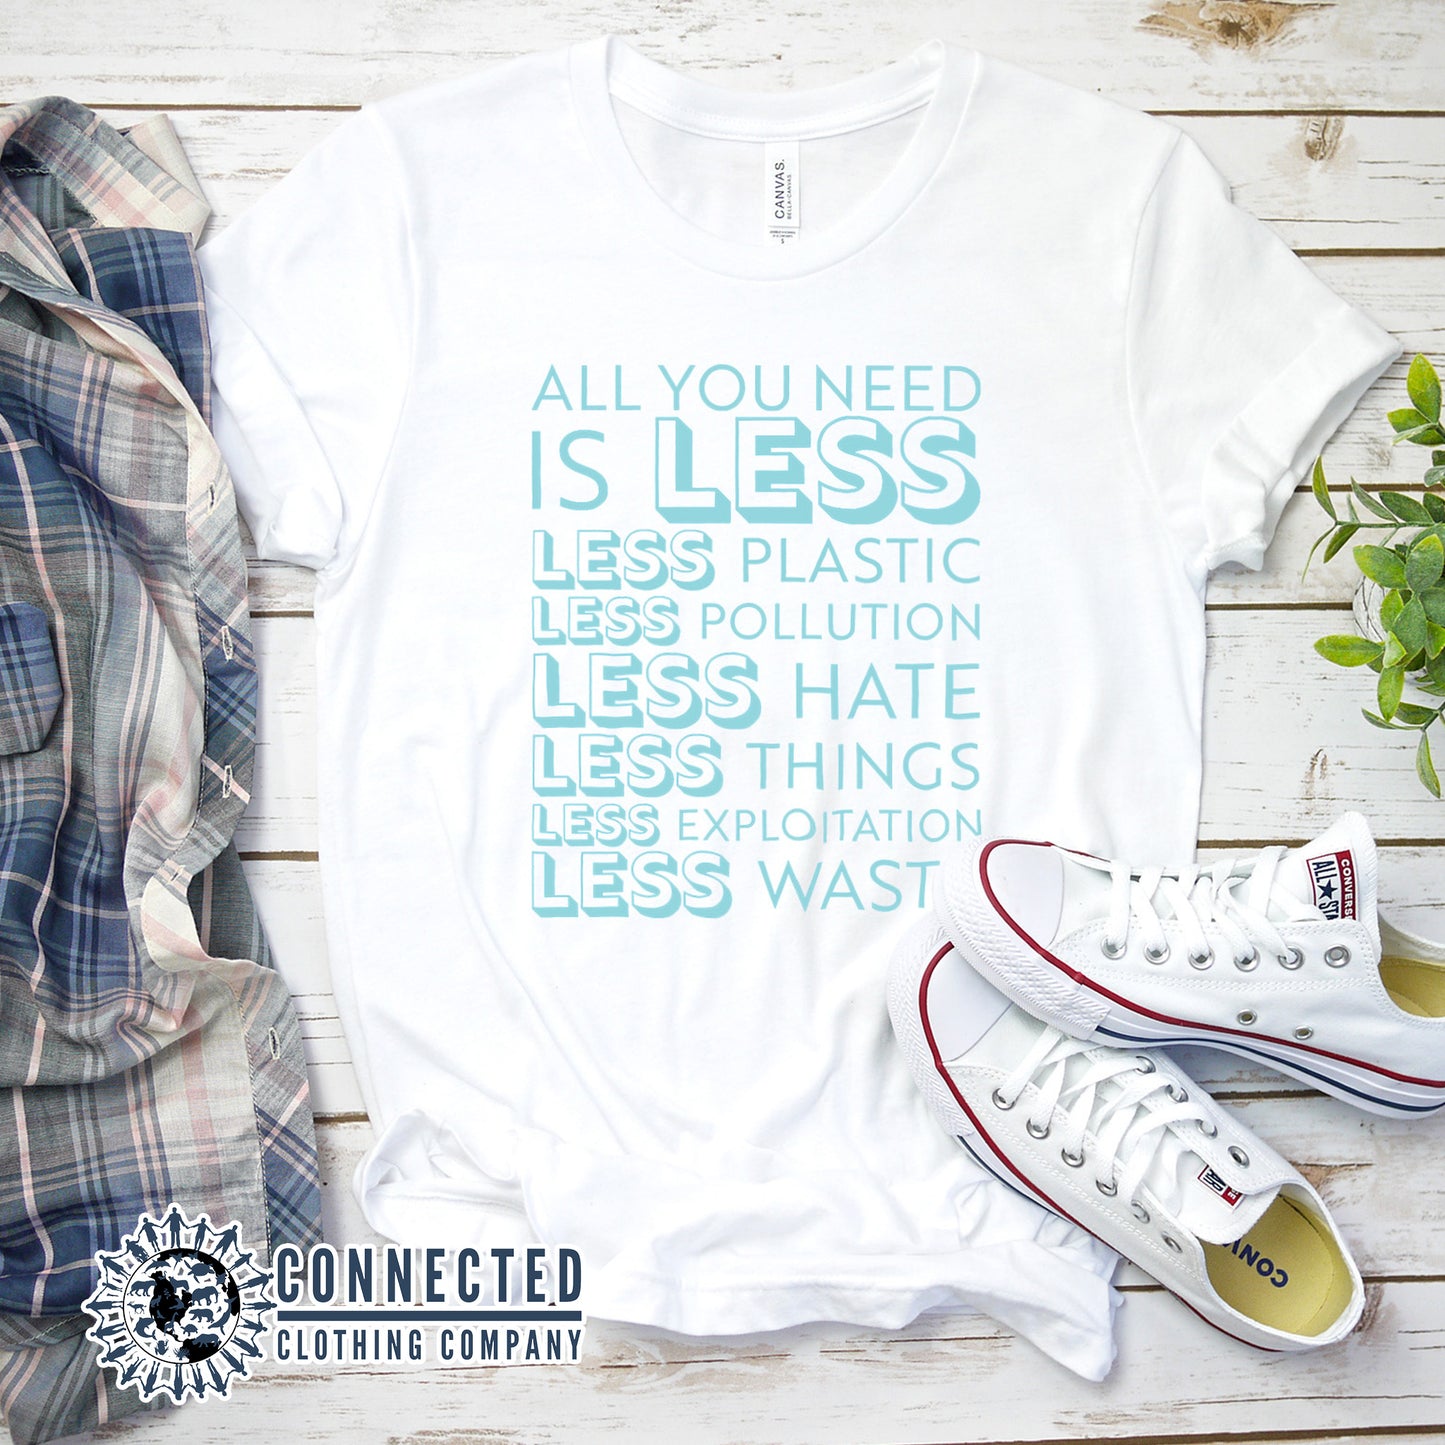 White All You Need Is Less Short-Sleeve Unisex Tee reads "all you need is less. less plastic. less pollution. less hate. less things. less exploitation. less waste." - sweetsherriloudesigns - Ethically and Sustainably Made - 10% of profits donated to Mission Blue ocean conservation